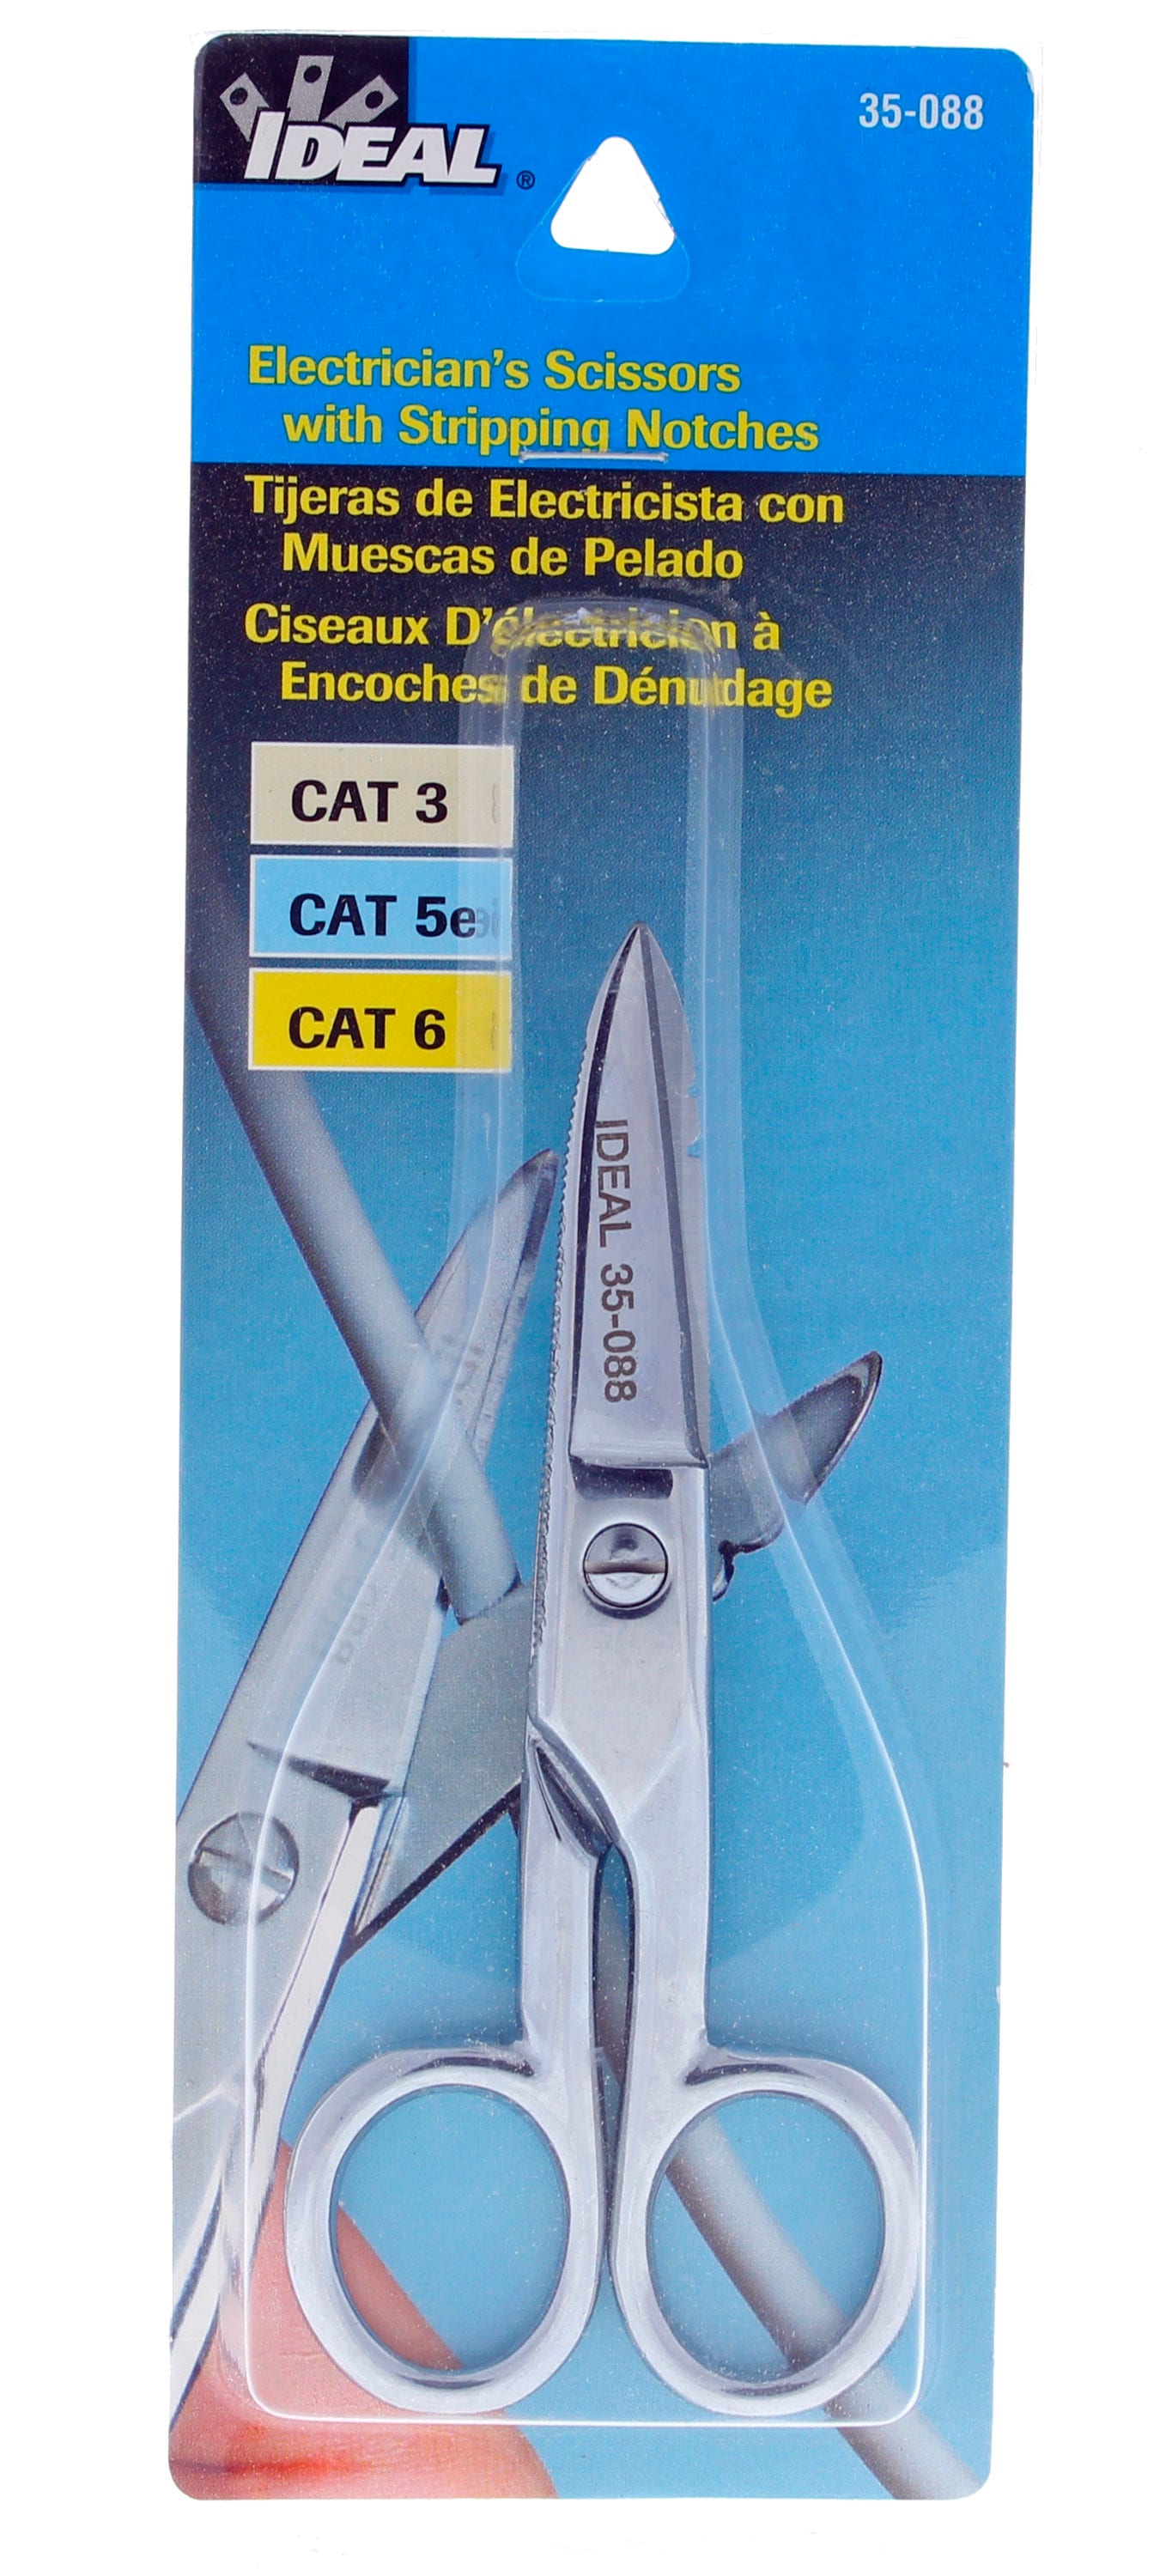 IDEAL Electrical 35-088 Electrician's Scissors with Stripping Notches